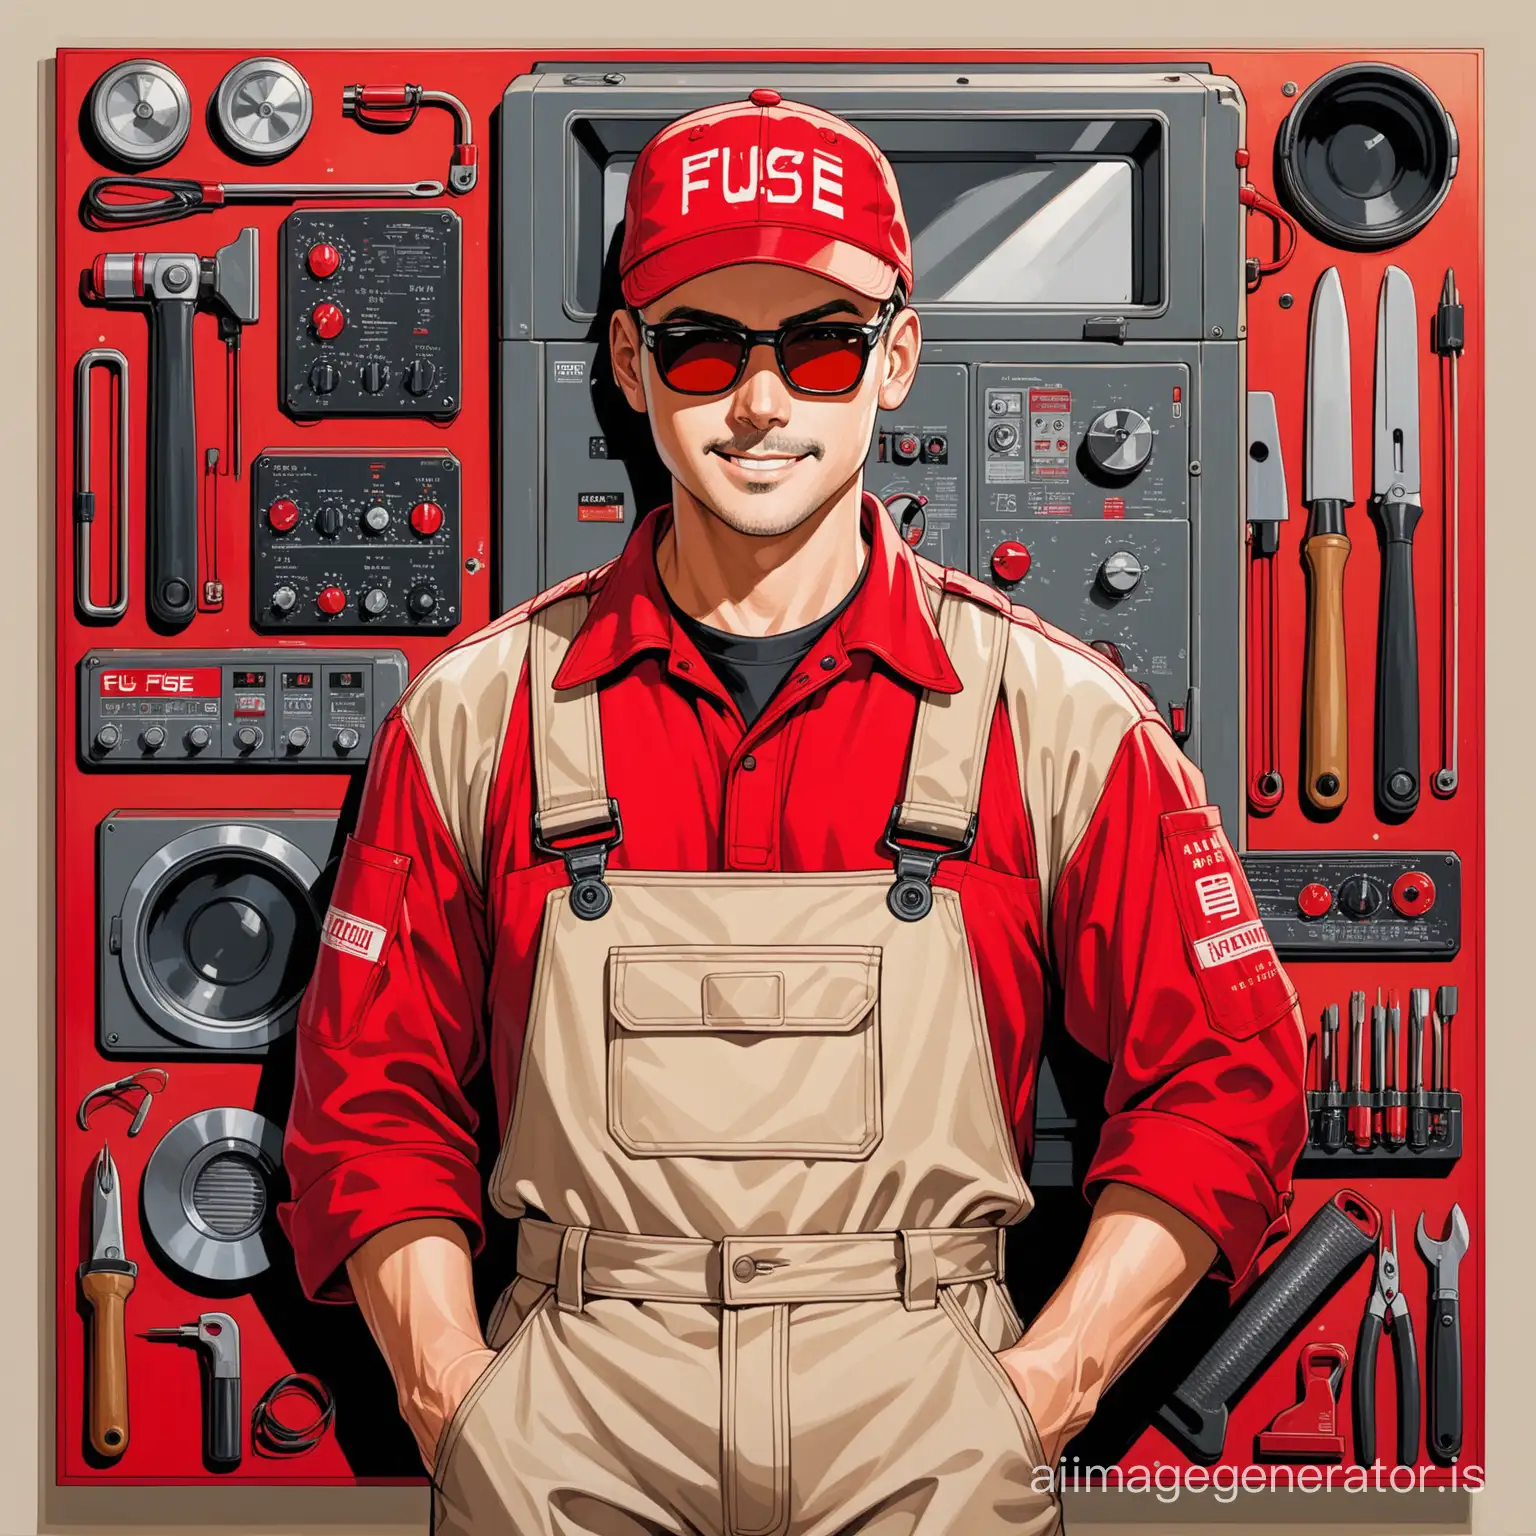 The joyful repairman of household appliances surrounded by tools looks at us from this painting. He wears a beige uniform - trousers, shirt, baseball cap. On the uniform, there is the inscription "FUSE". The overall background is in shades of red, gray, and black.